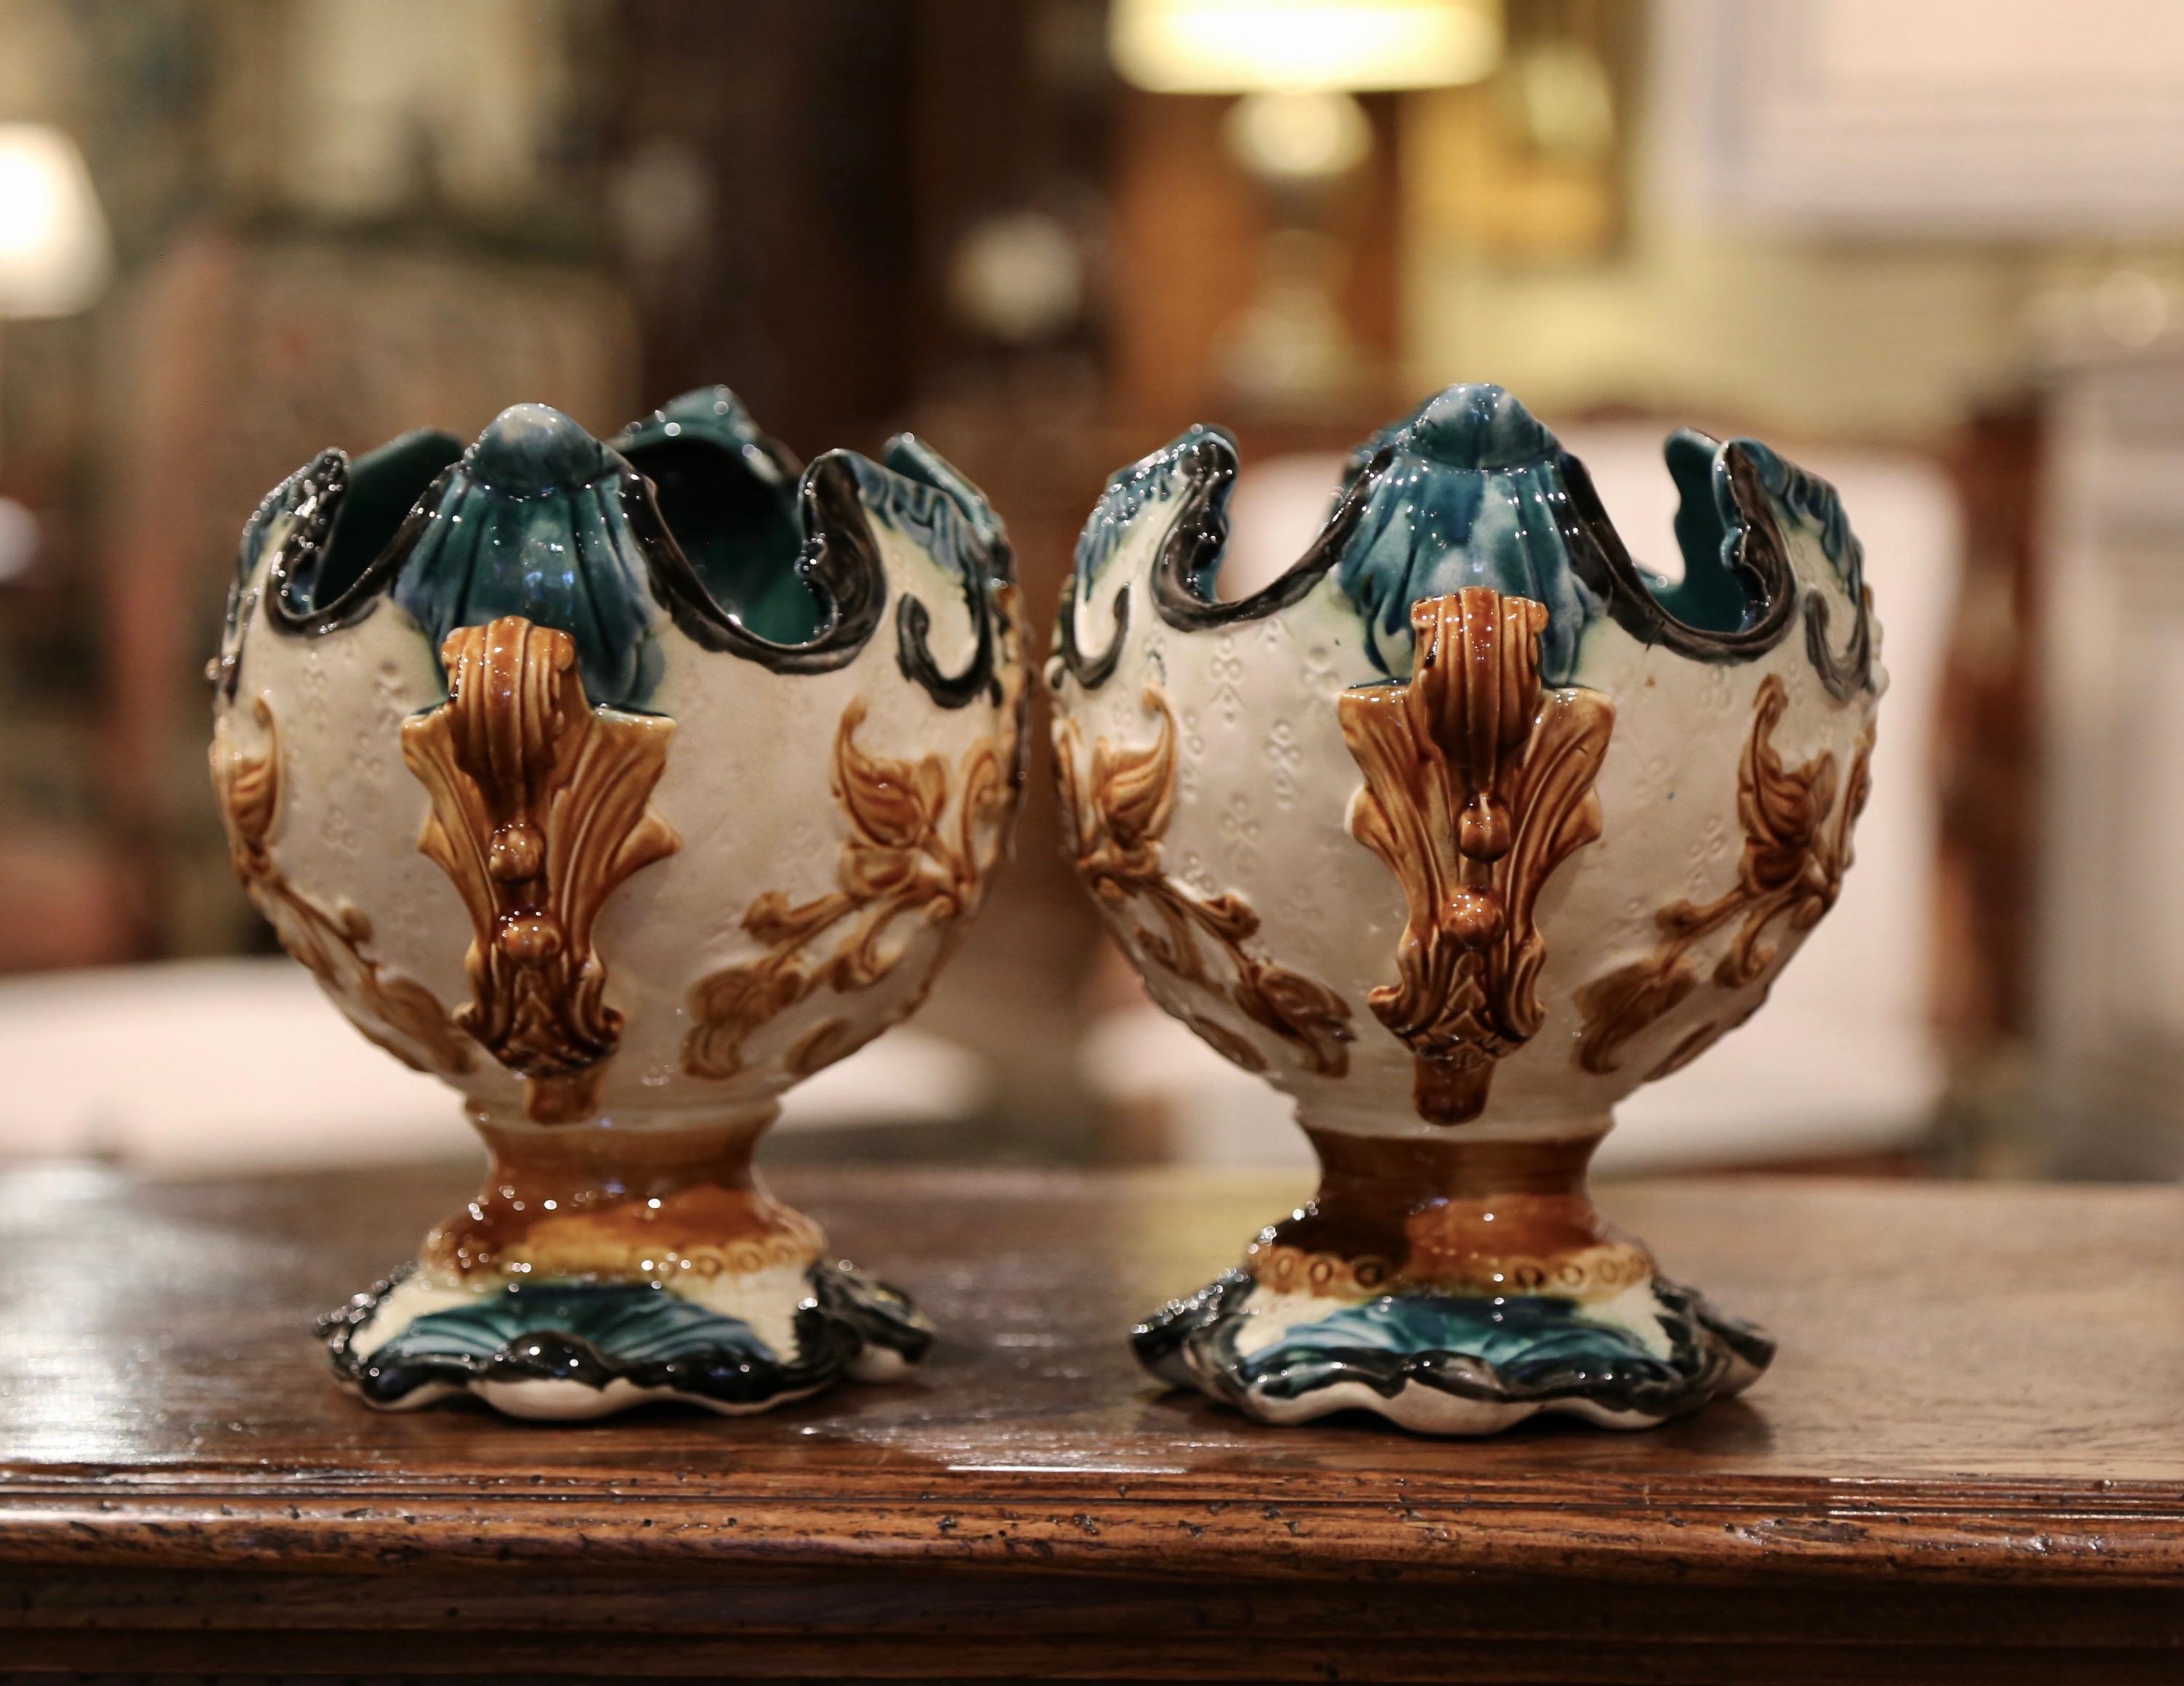 Ceramic Pair of 19th Century French Barbotine Cachepots with Dry Floral Arrangements